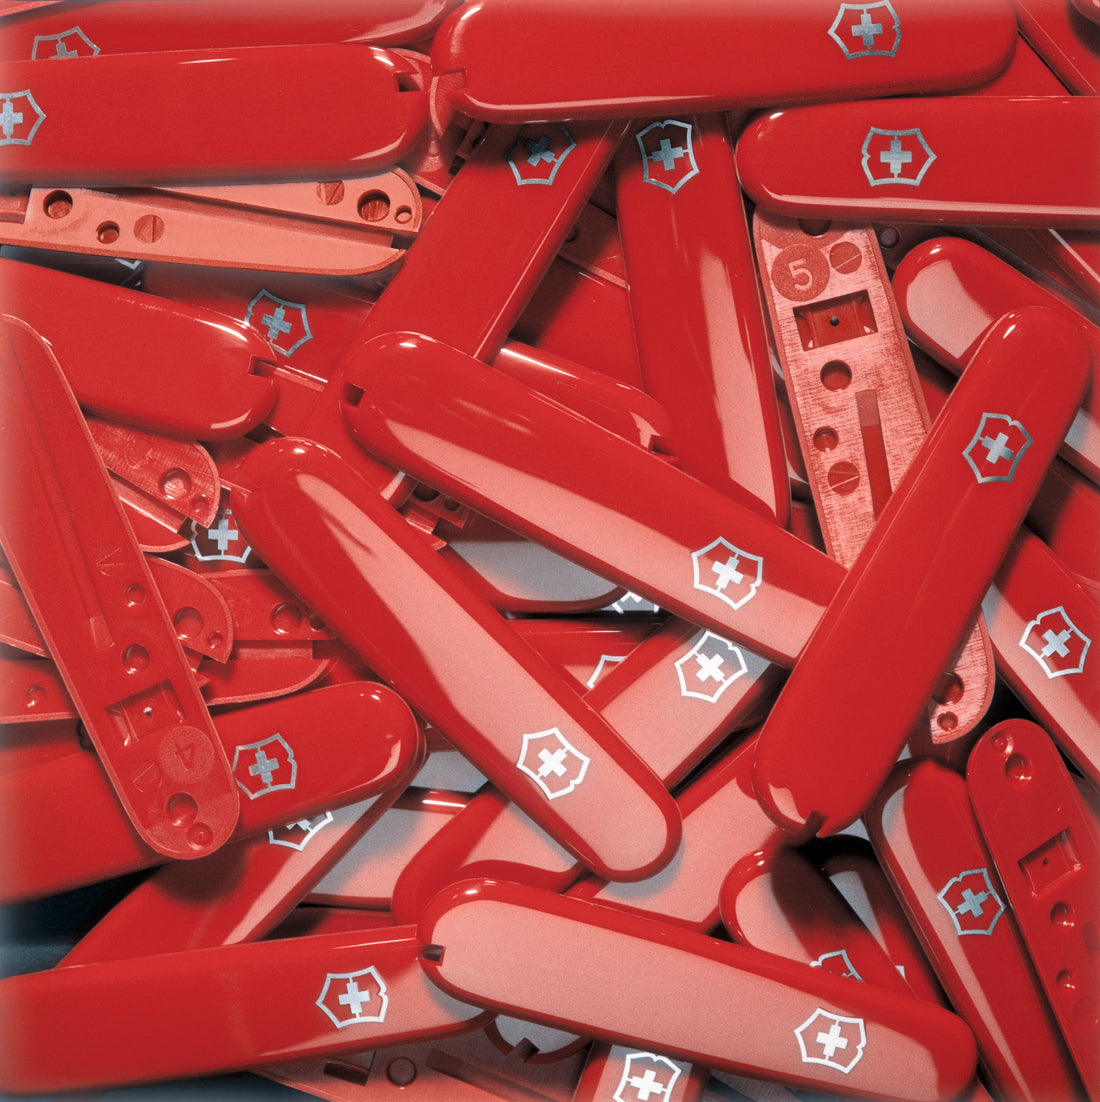 Wenger or Victorinox? Identifying your Swiss Army Knife for repairs and replacement parts.